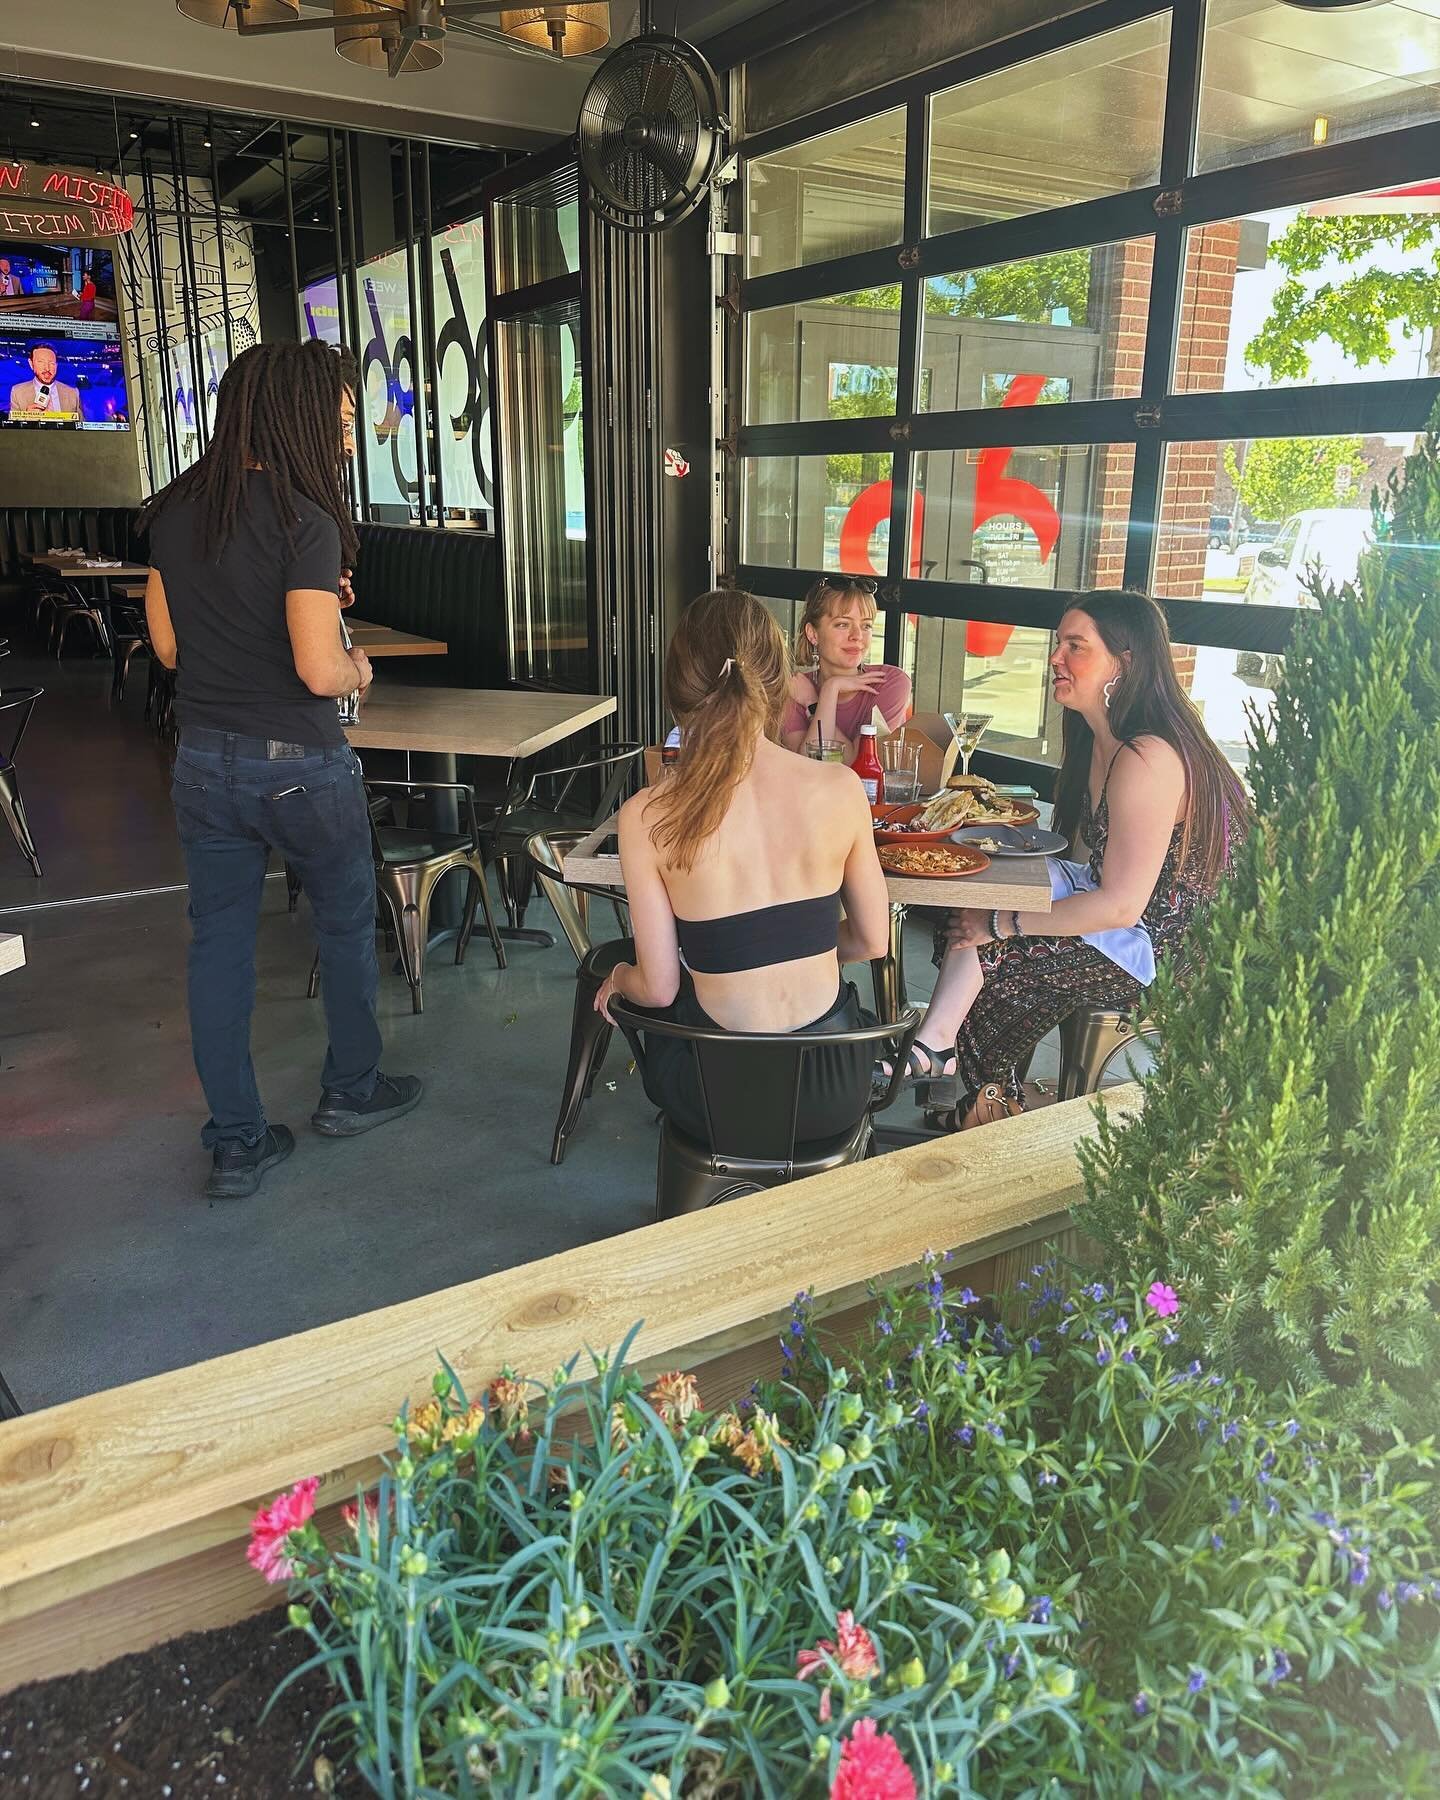 If Oklahoma could chill on the rain, that&rsquo;d be great. 🙃Our patio garage doors are begging to be open. Now accepting Mother&rsquo;s Day brunch and dinner reservations. 
.
.
Find us in the former Laffa building, open Tuesday through Sunday from 